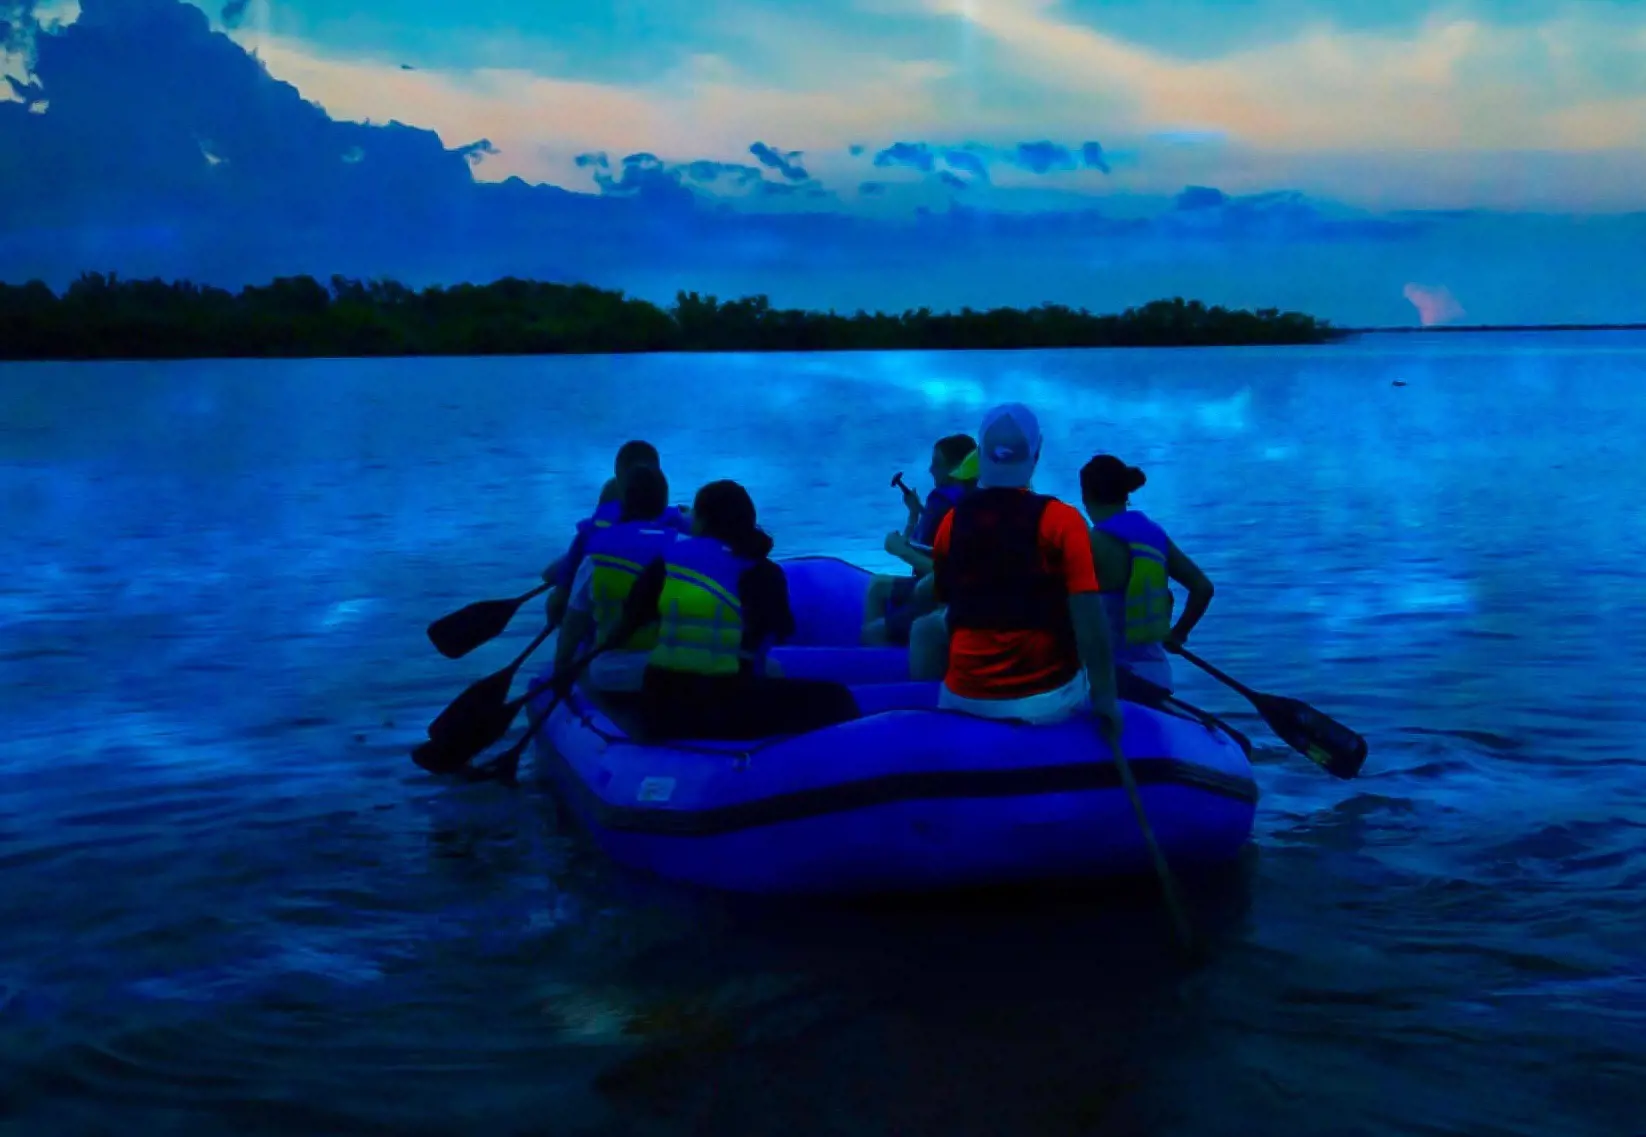 Night Kayaking Bioluminescence tour is a complete family friendly package to do in Florida